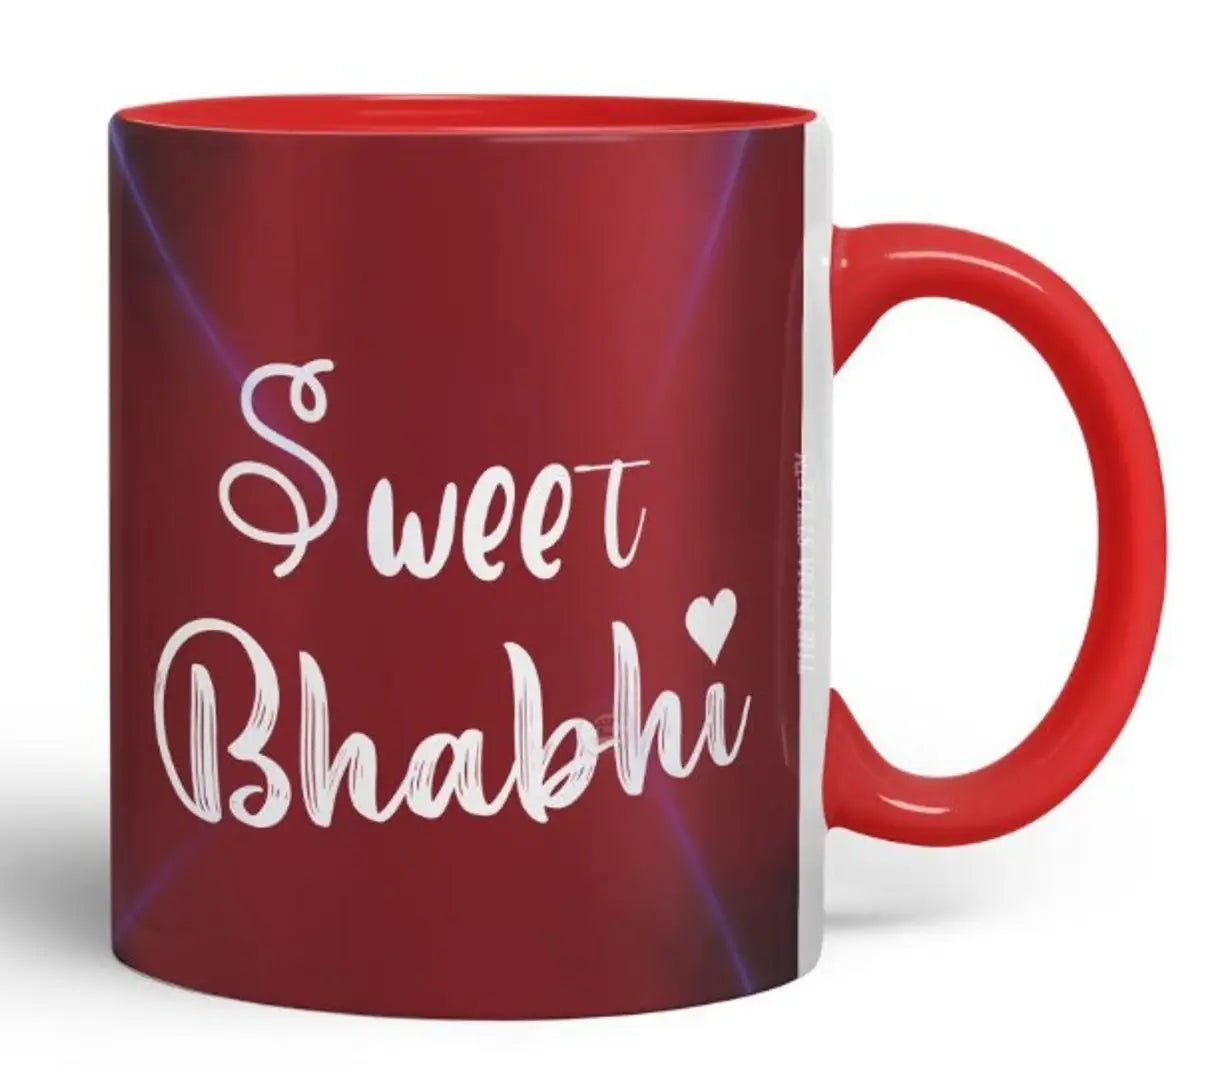 Stylish 2 Rakhi with 2 Ceramic Printed Mug (325 Ml) And 1 Packet Roli Chawal With Best Wishes Greeting Card